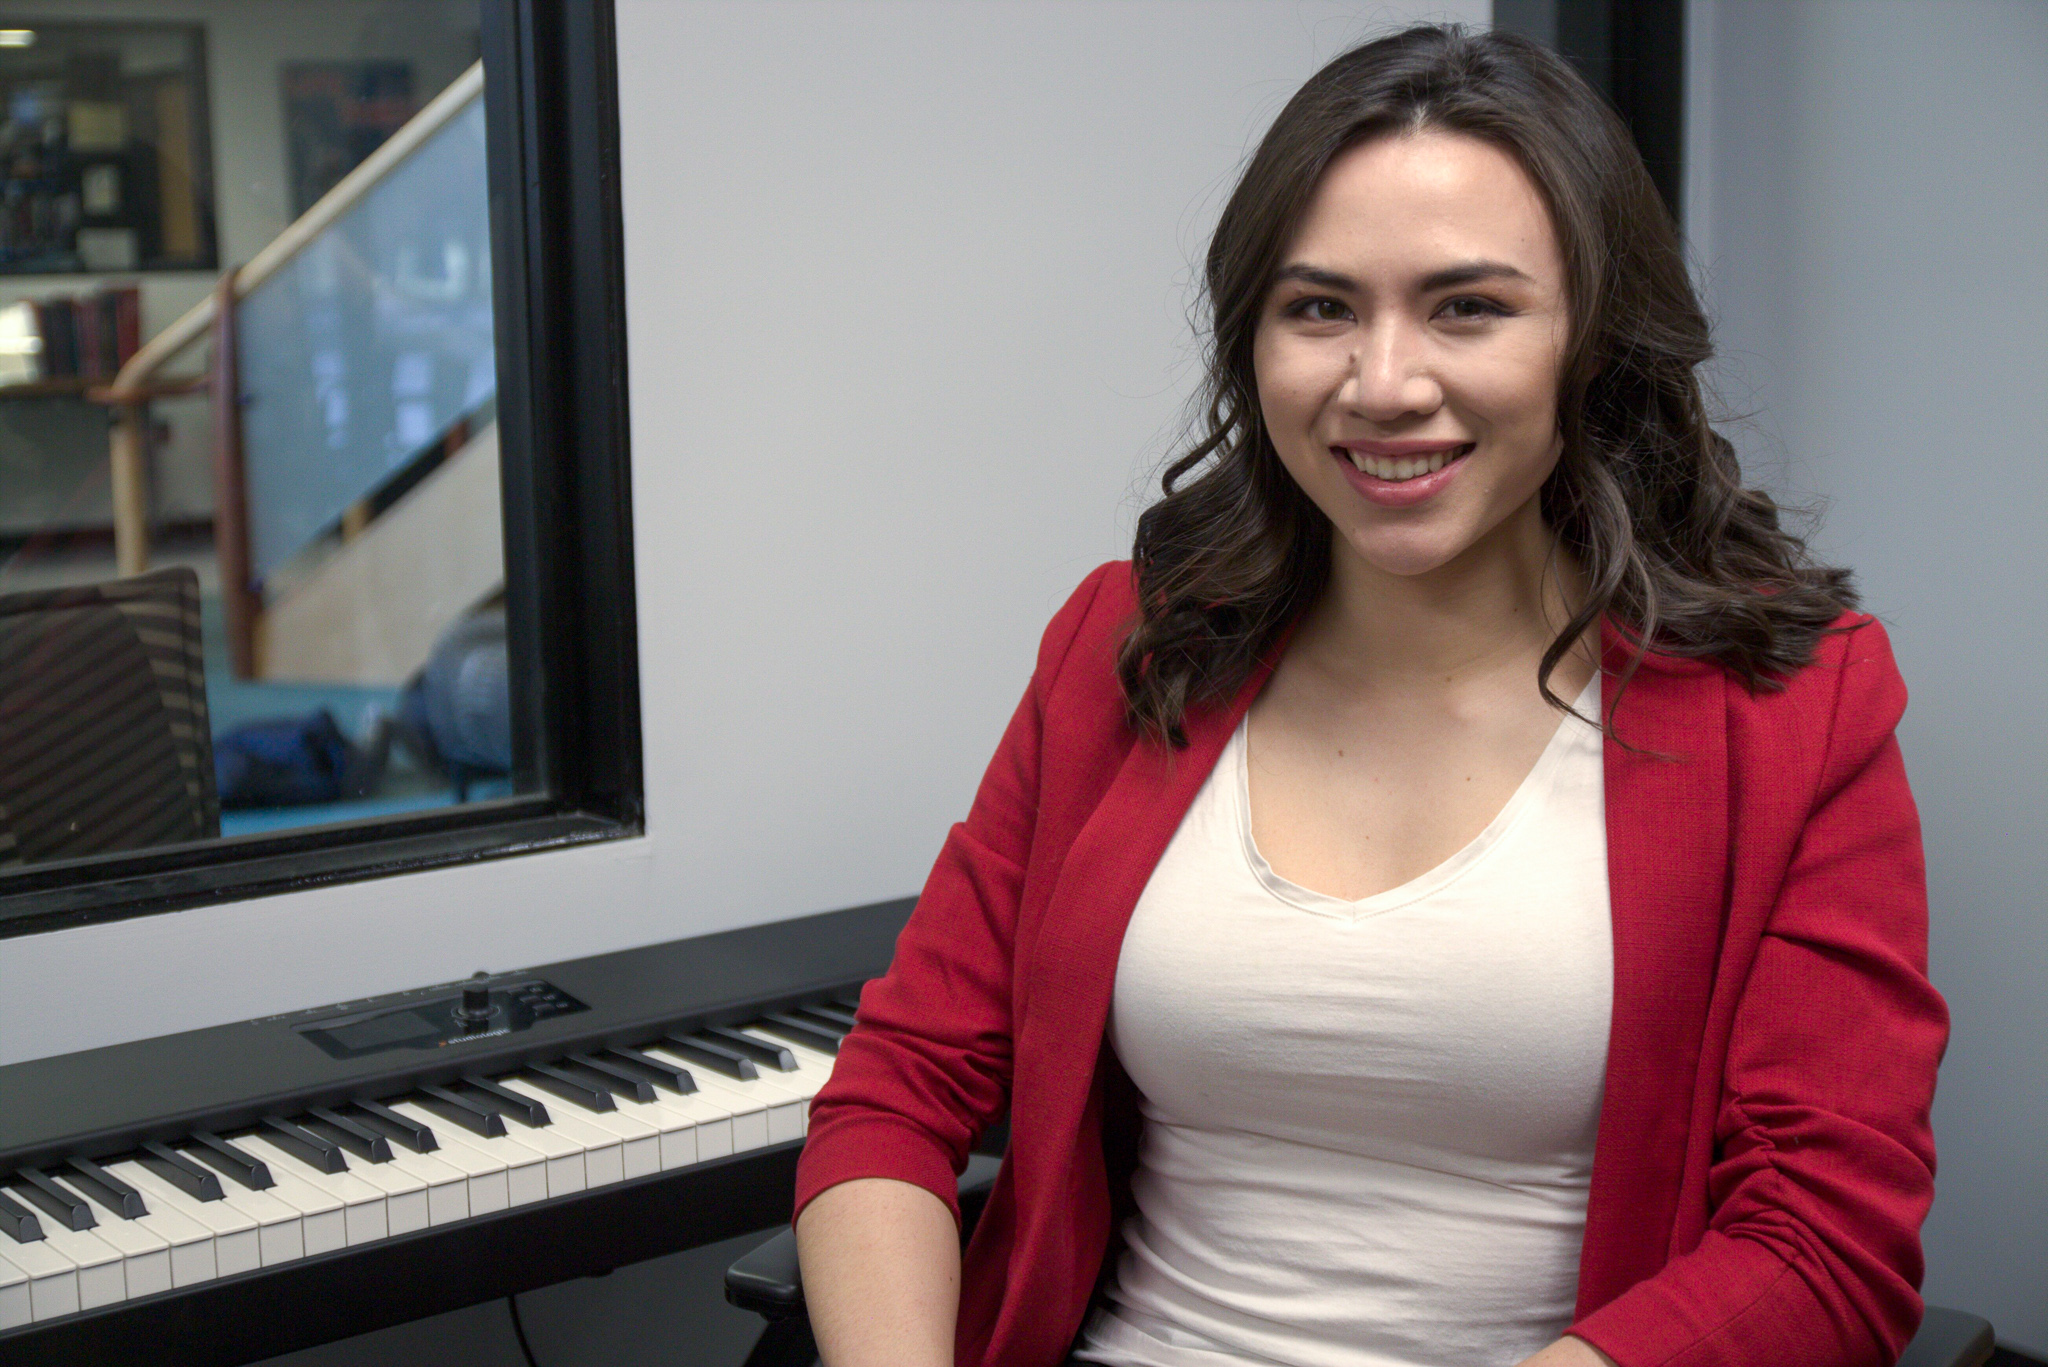 A young woman with brown hair sits smiling in front of a piano keyboard.